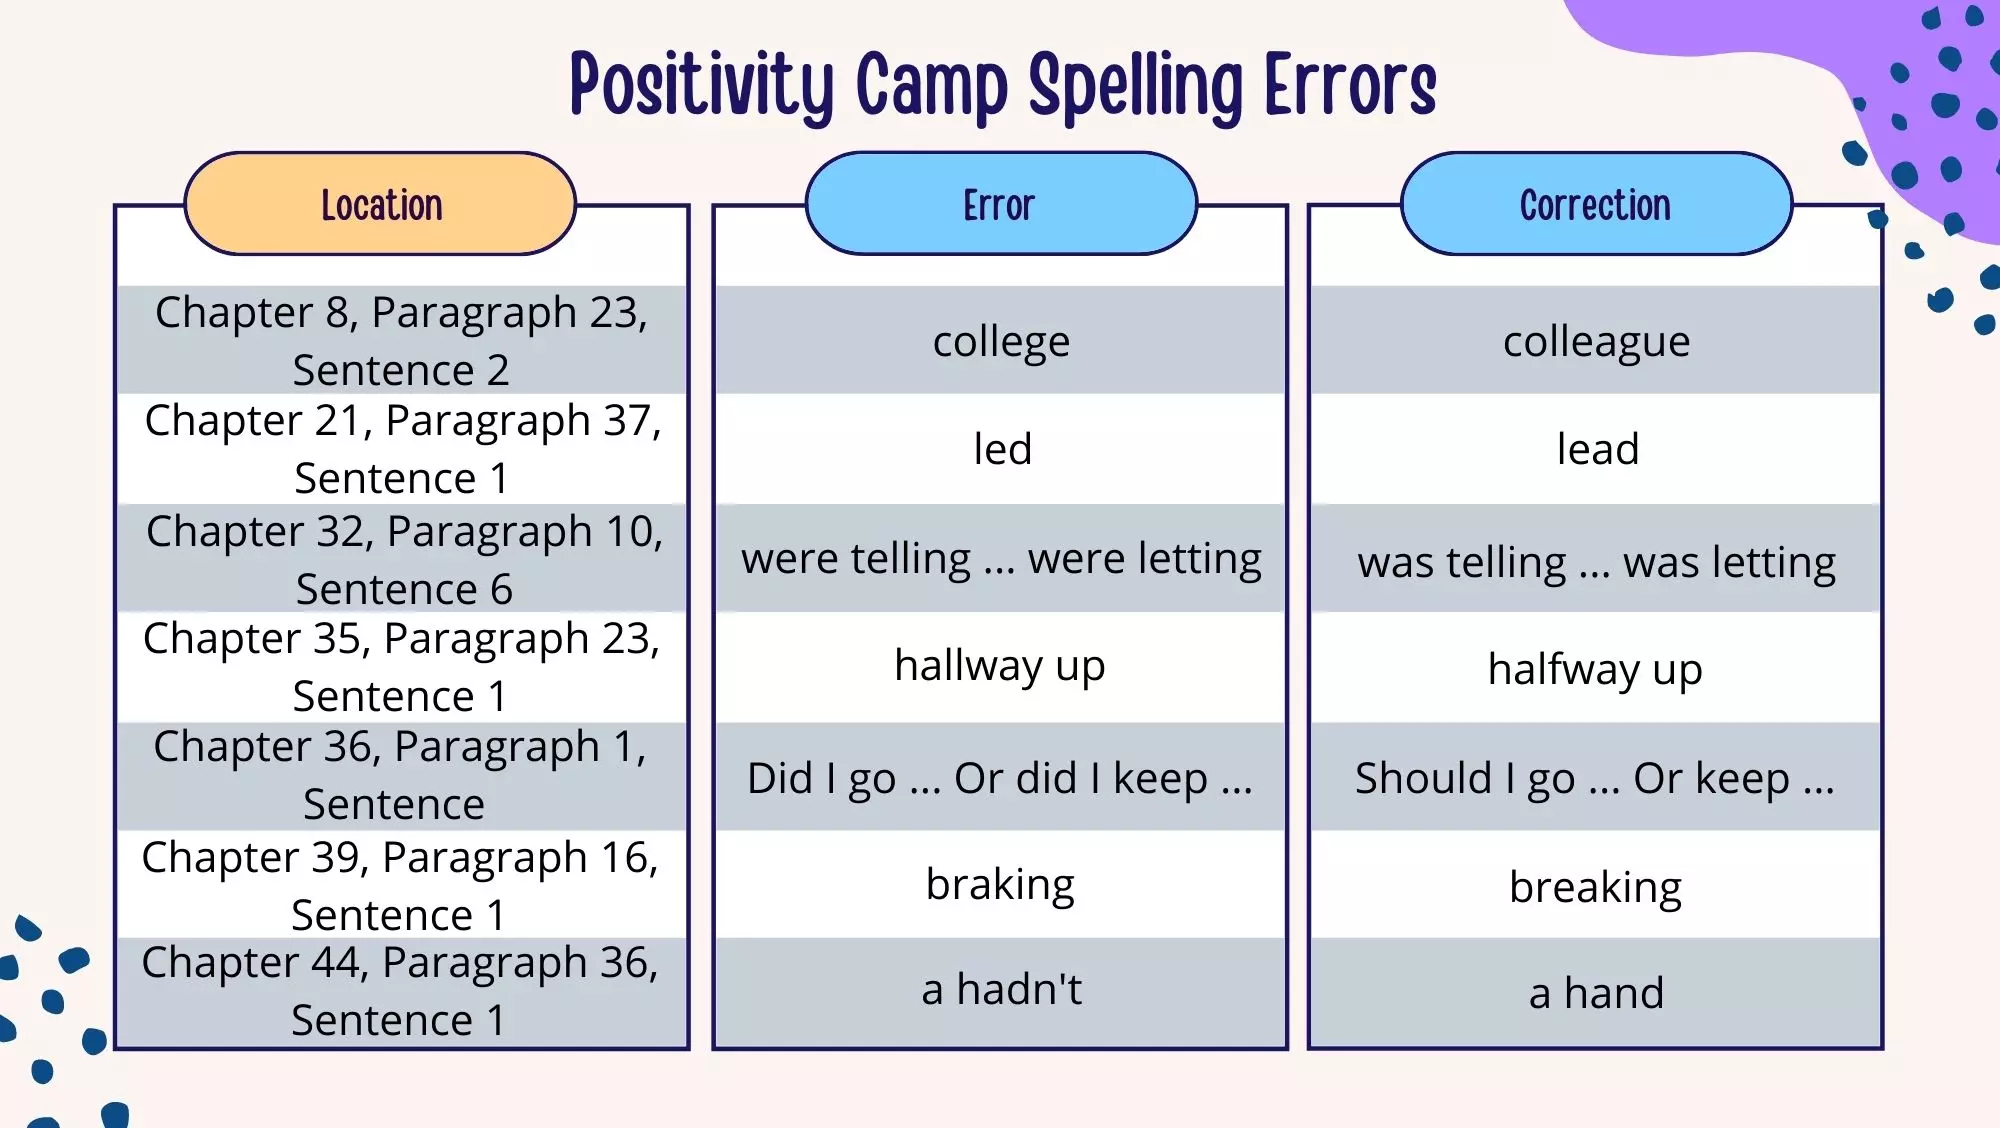 Missing Sentences and Other Errors in Positivity Camp 1